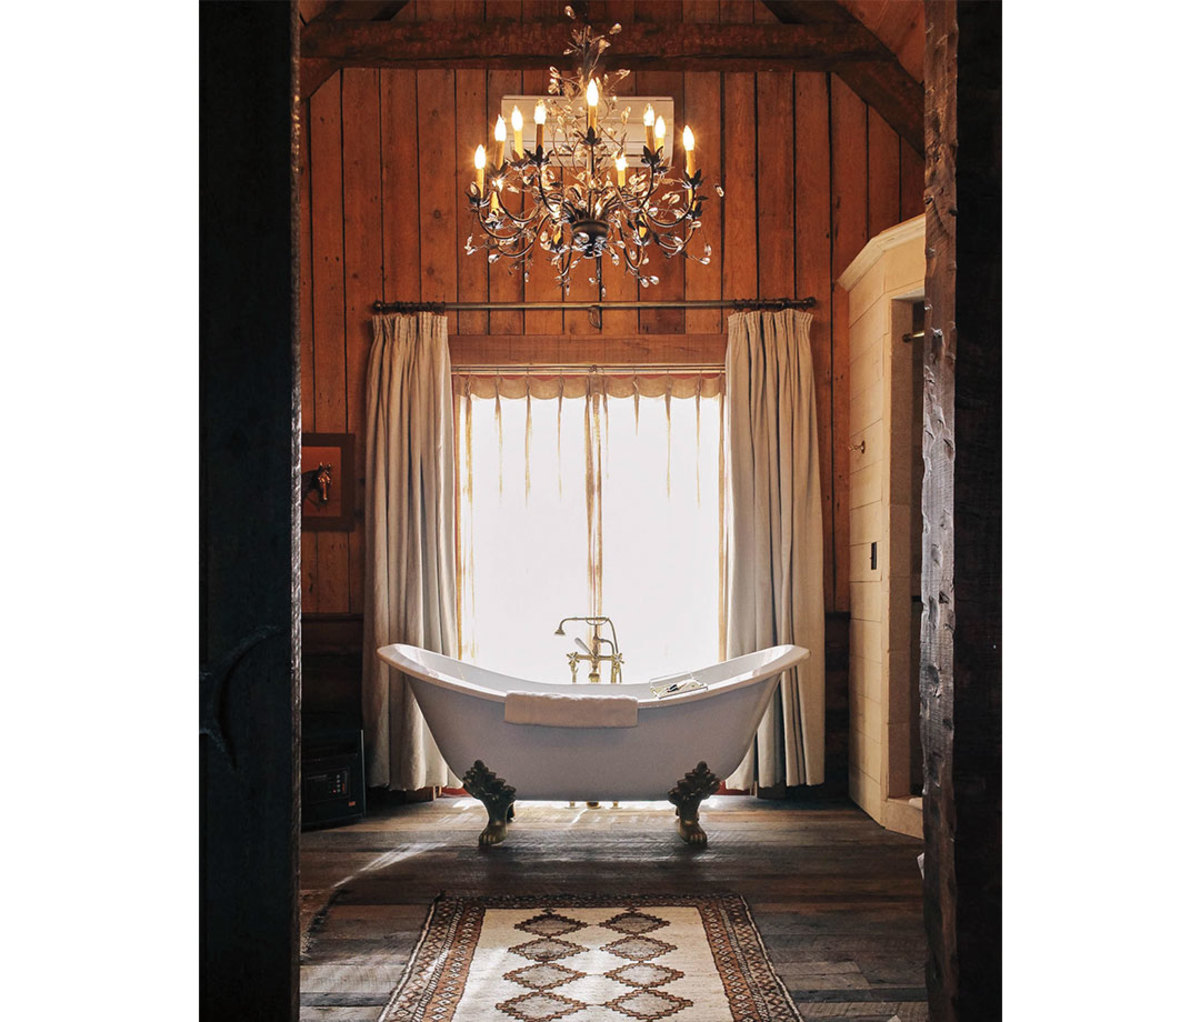 Clawfoot tub with chandelier above